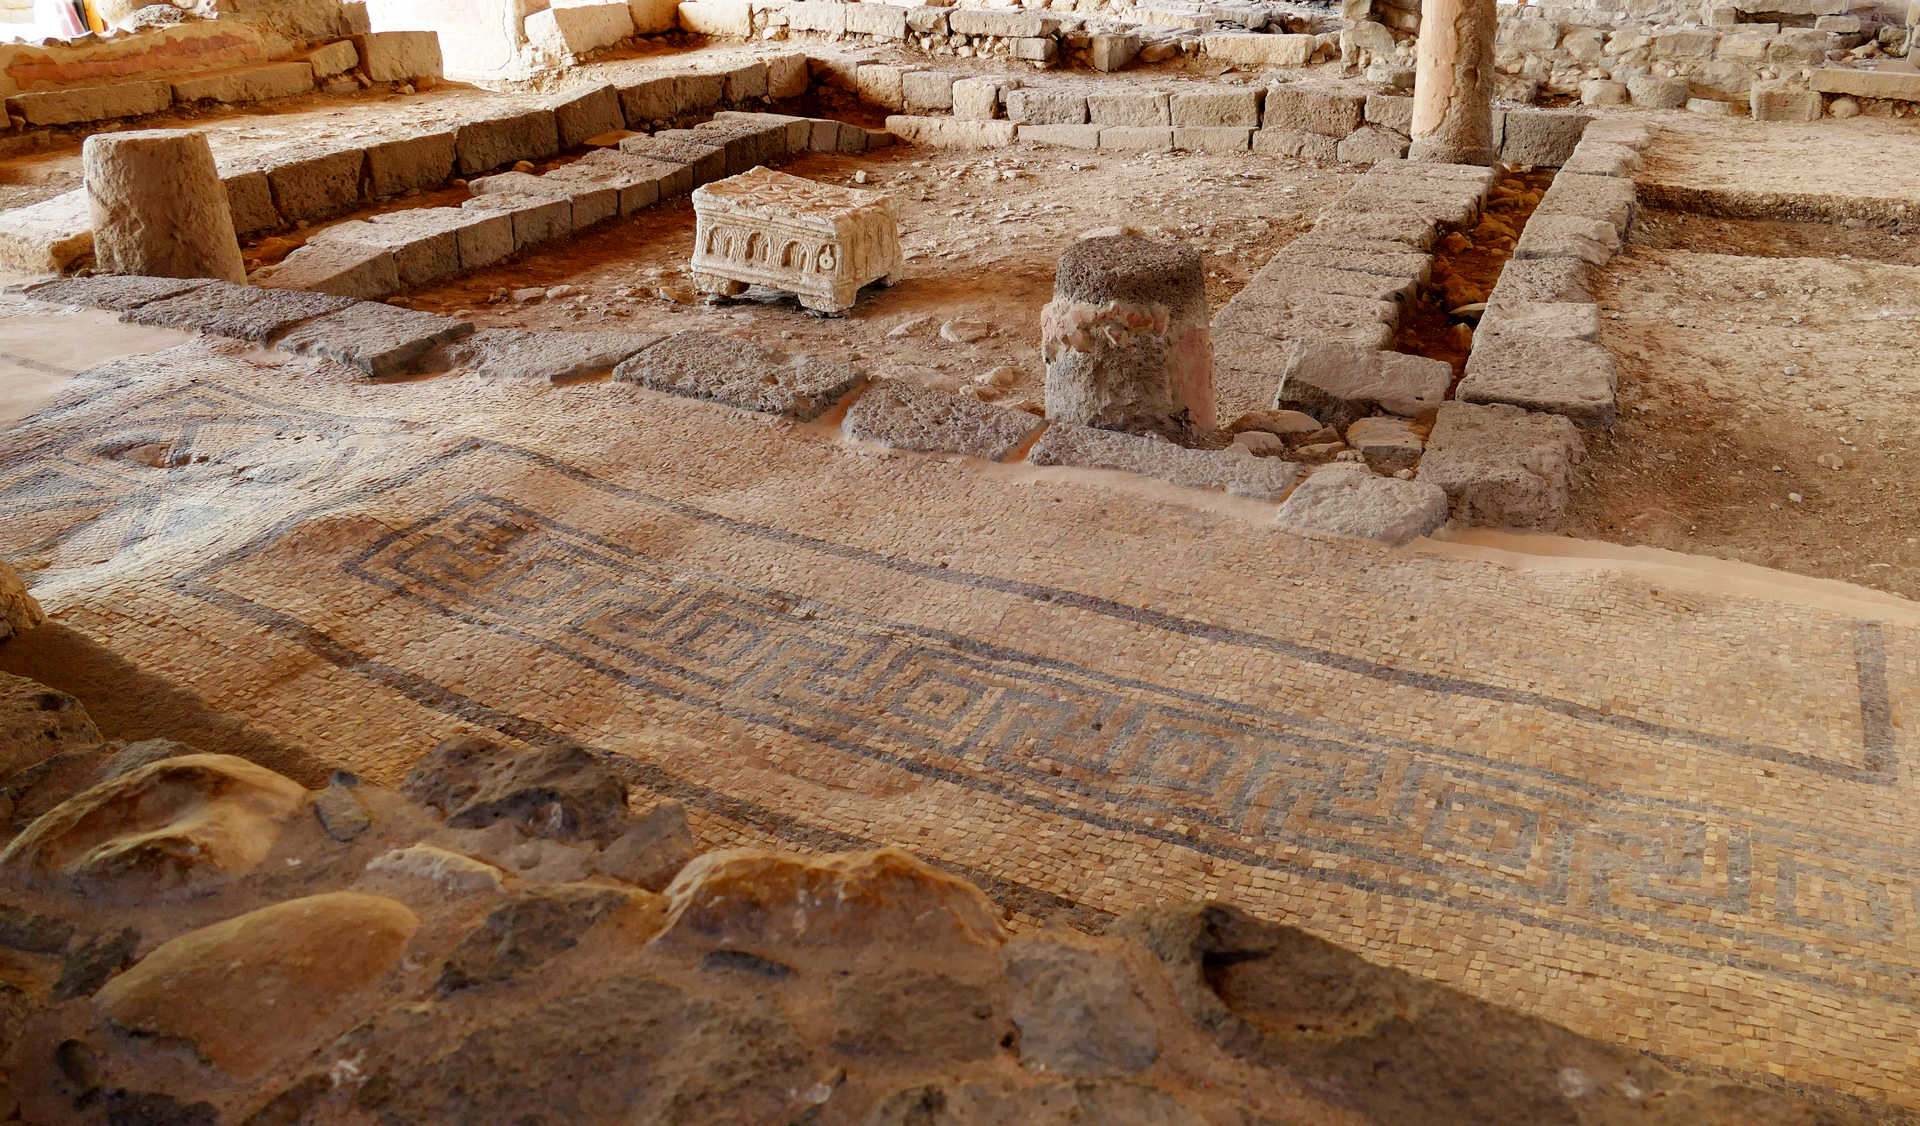 Ruins of ancient synagogue in Magdala, Israel. Photographer: Bukvoed (cropped) License: CC BY 4.0.